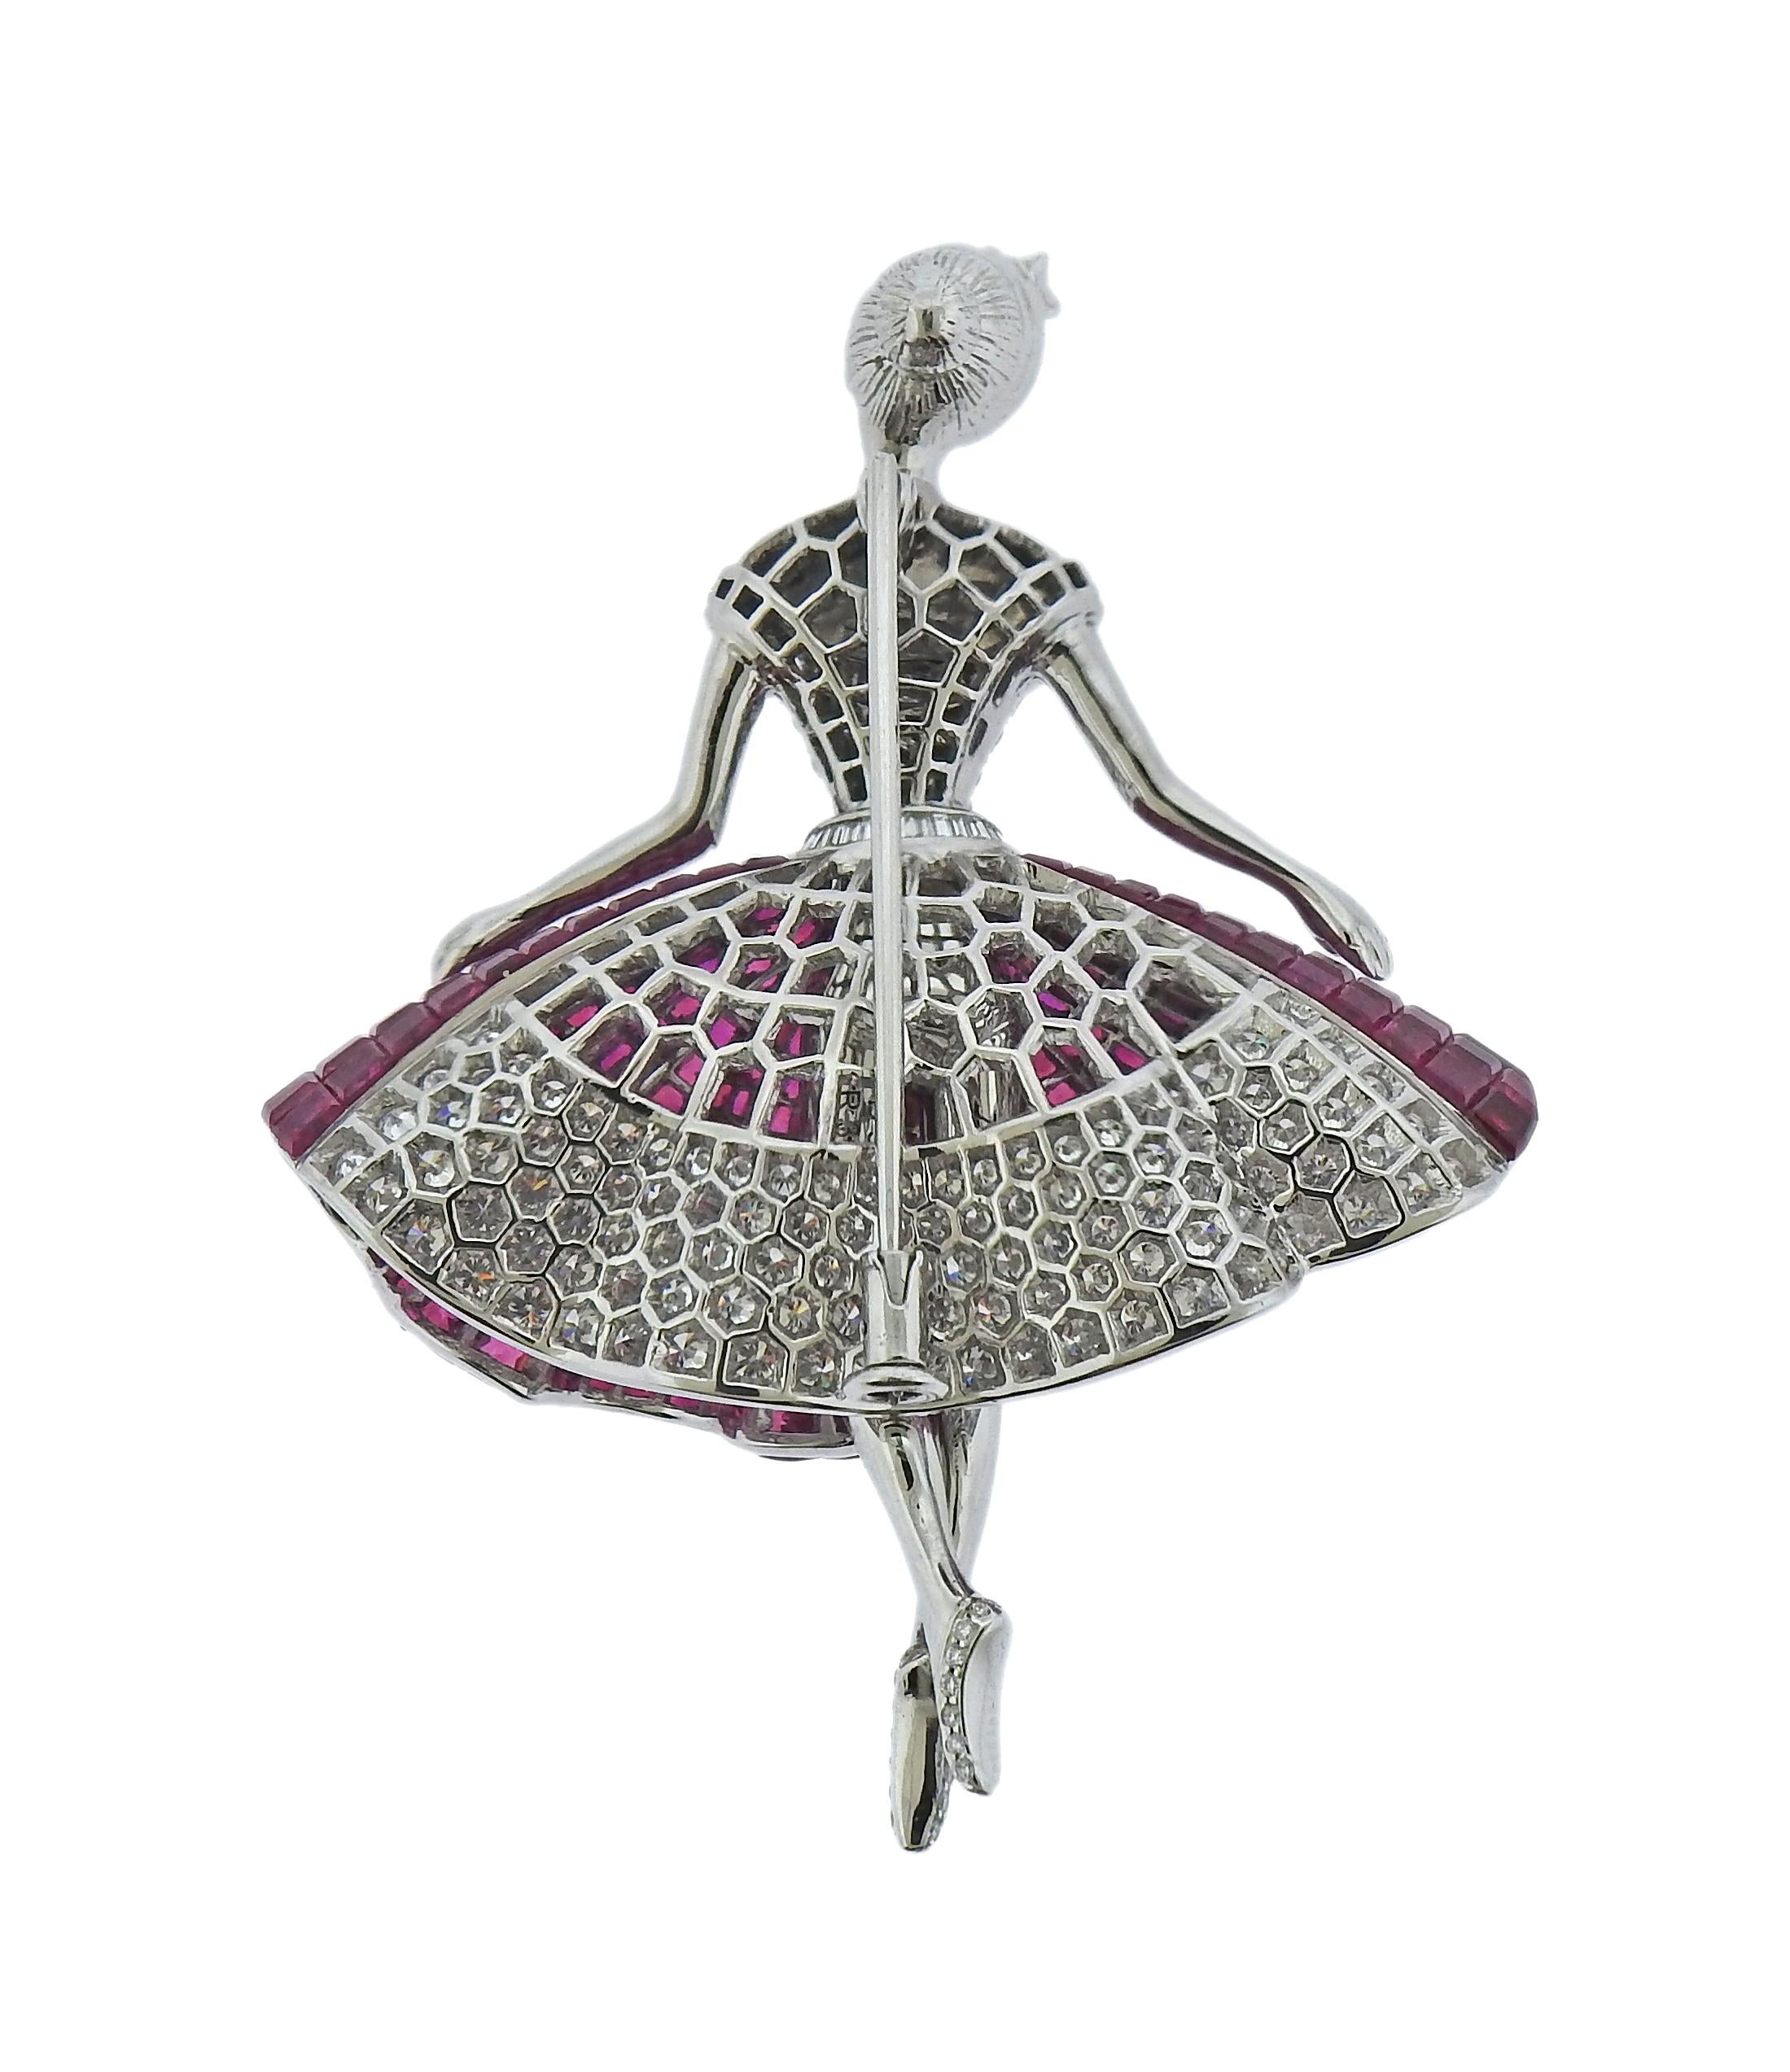 One of a kind, 18k white gold beautiful ballerina brooch by Alexis, with 30.88cts in invisible set rubies and 3.39ctw in diamonds. Brooch measures 2 3/8